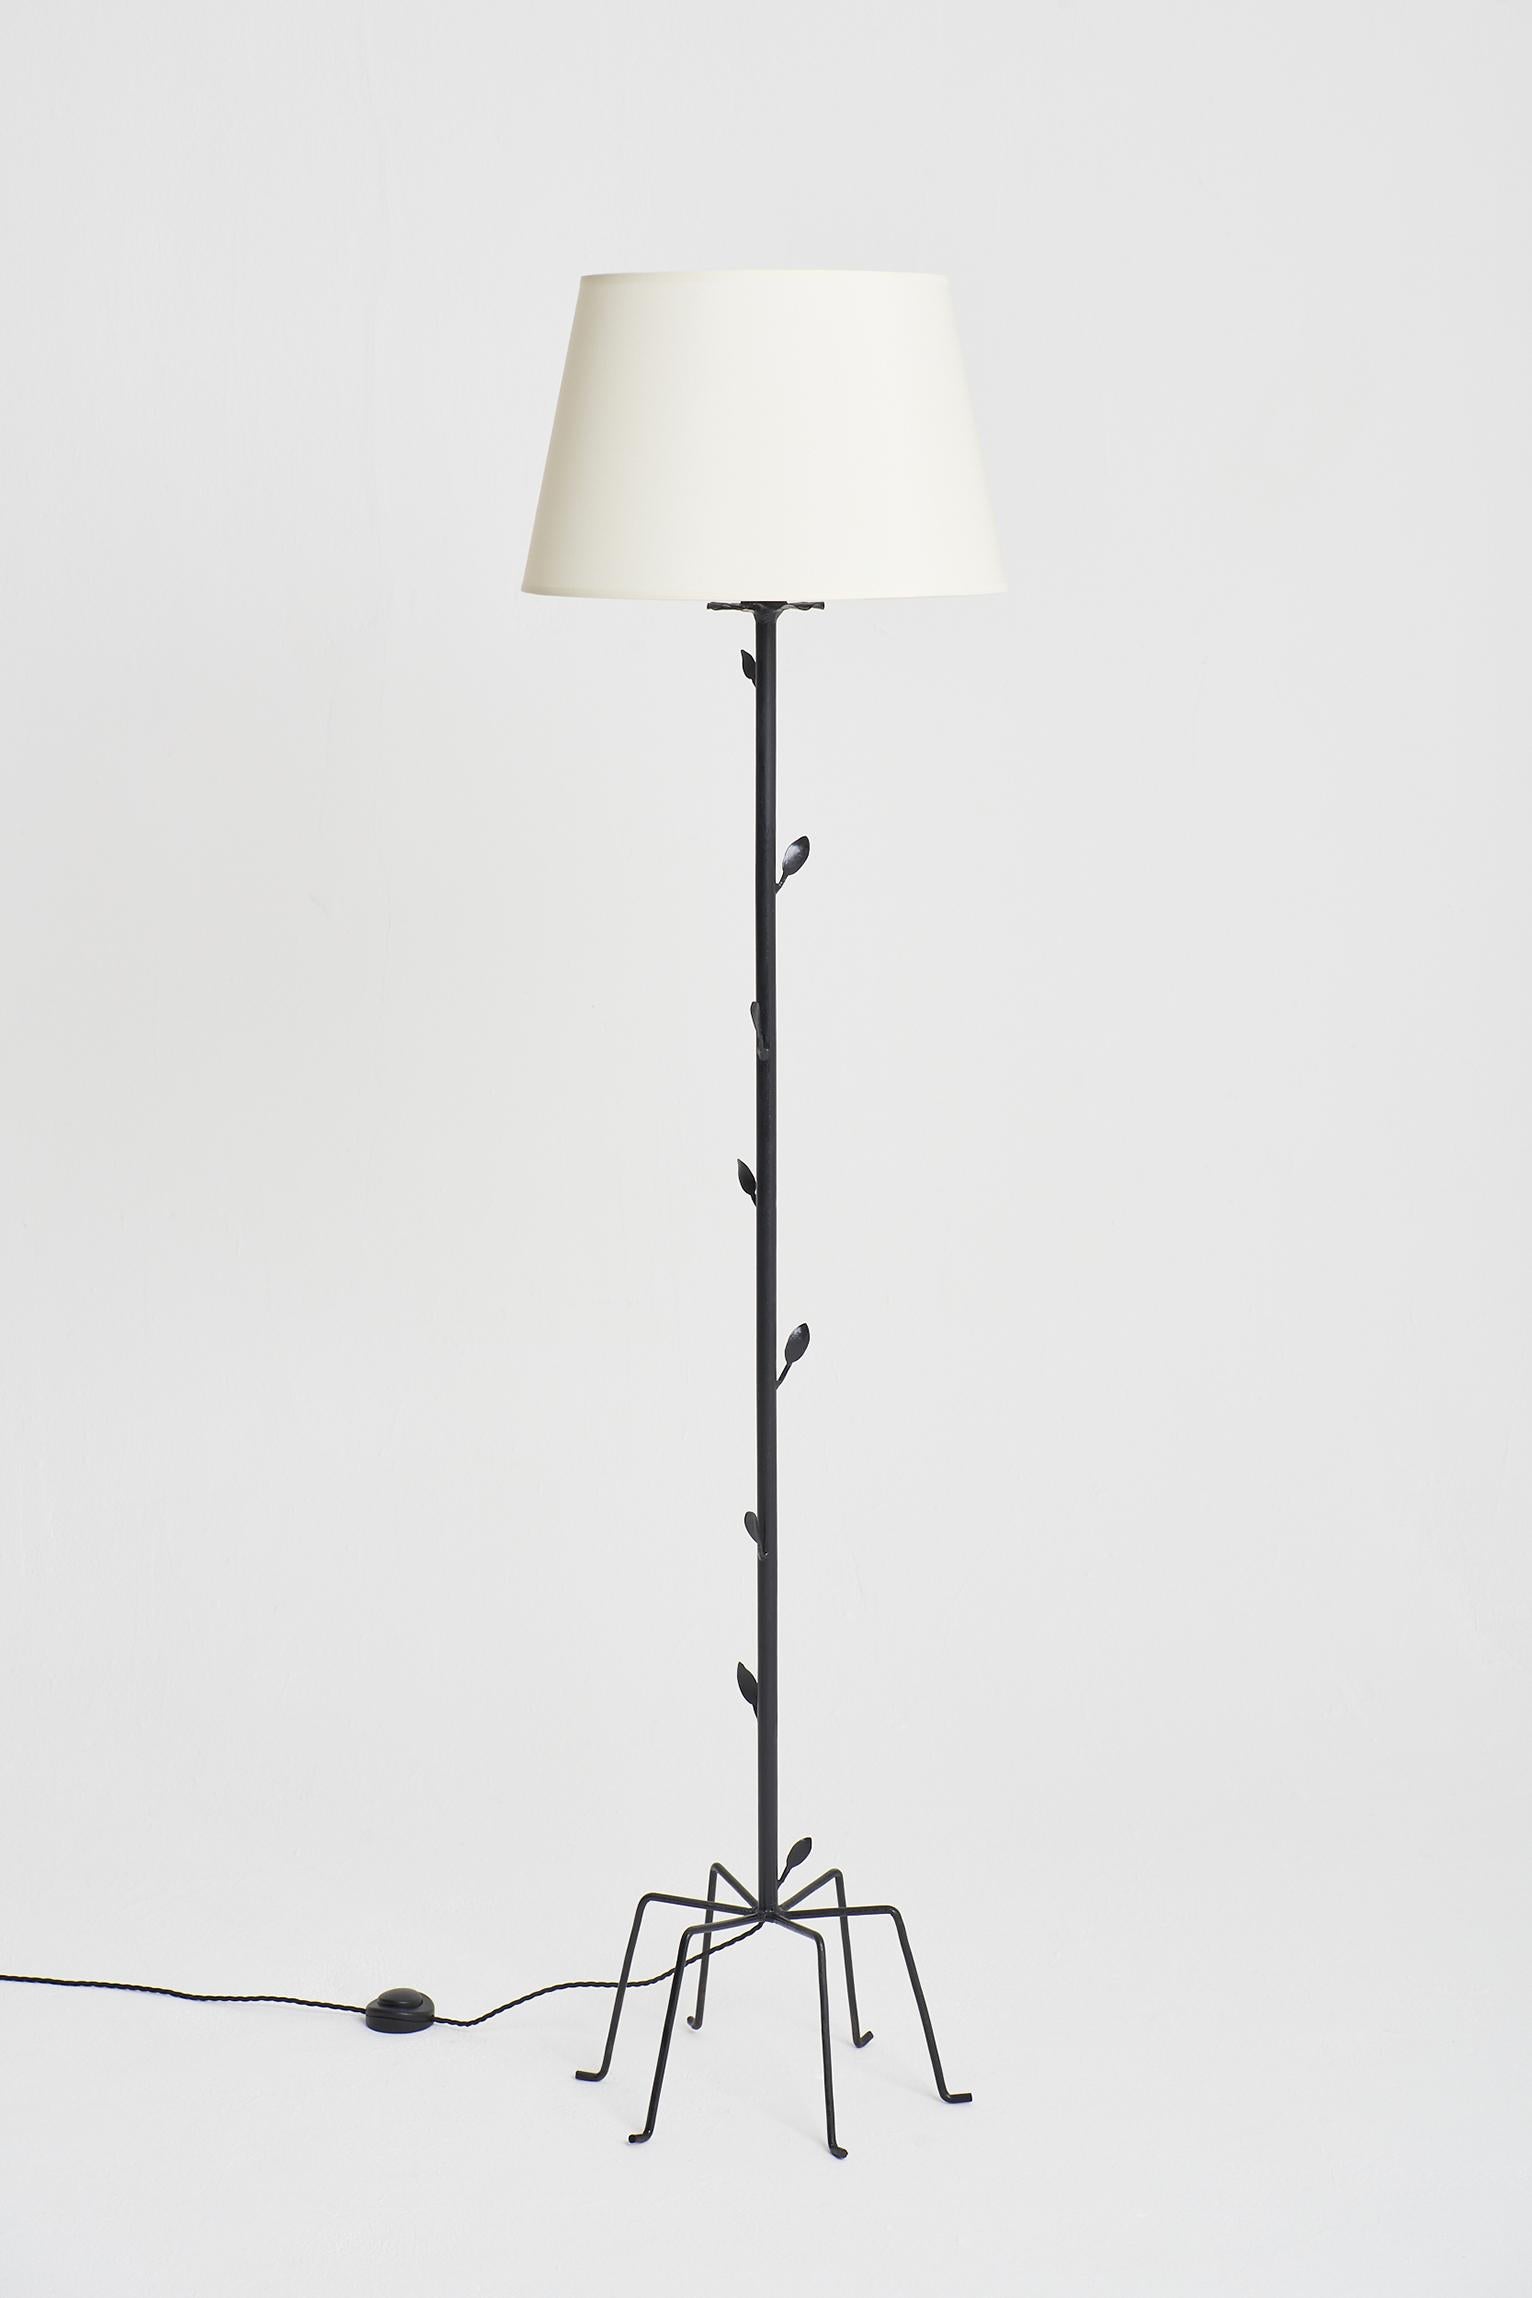 A black enamelled wrought iron floor lamp, with leaves motifs.
Second half of the 20th century.
With the shade: 158 cm high by 41 cm diameter.
Lamp base only: 137 cm high by 36 cm diameter.